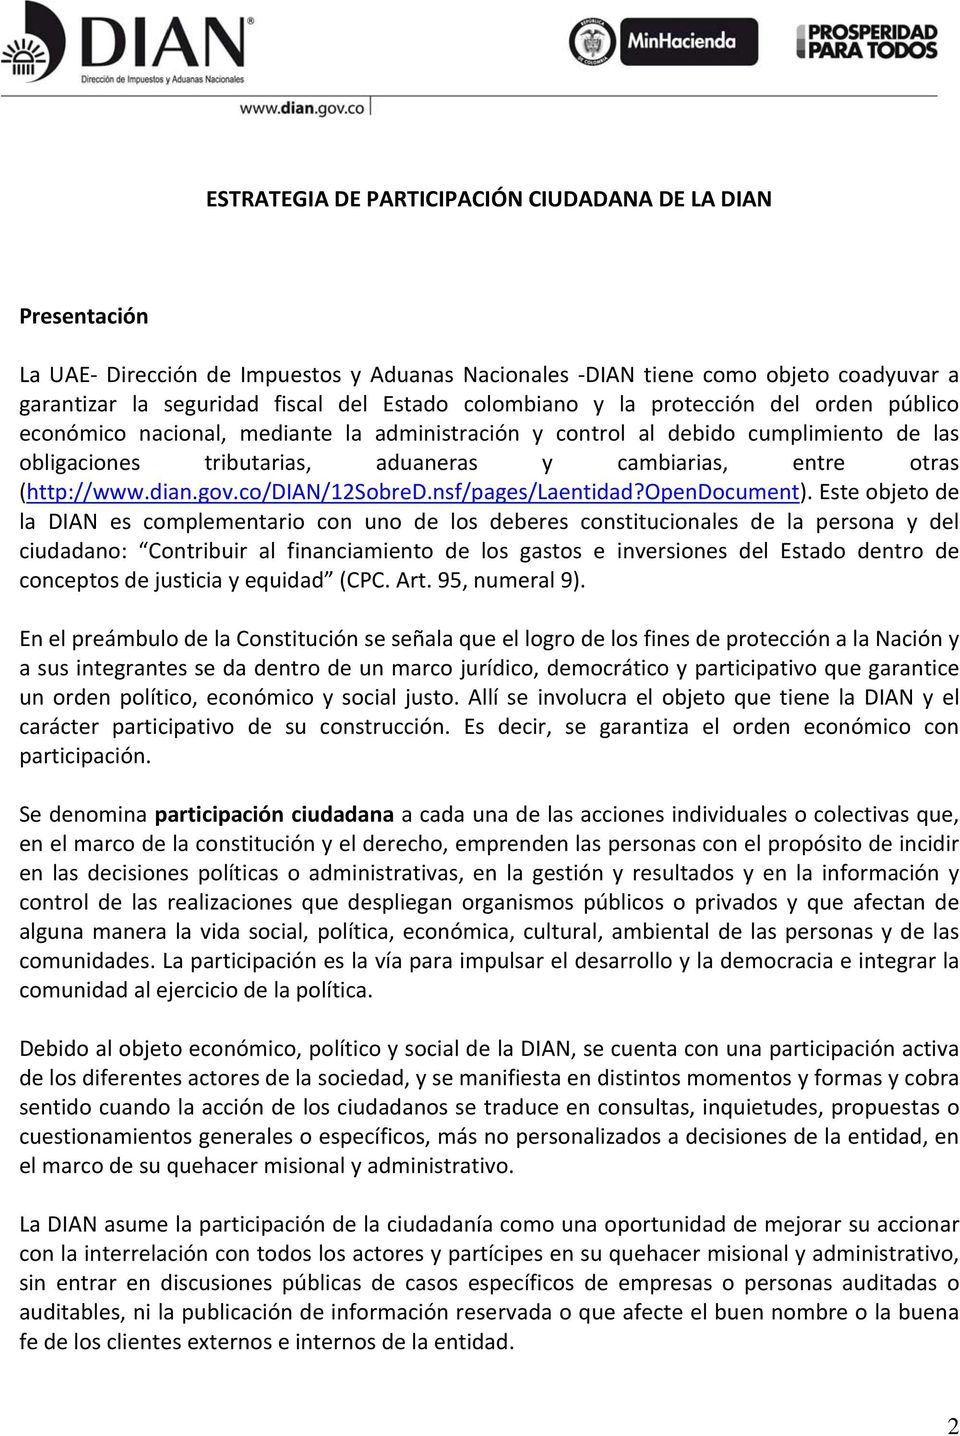 (http://www.dian.gov.co/dian/12sobred.nsf/pages/laentidad?opendocument).